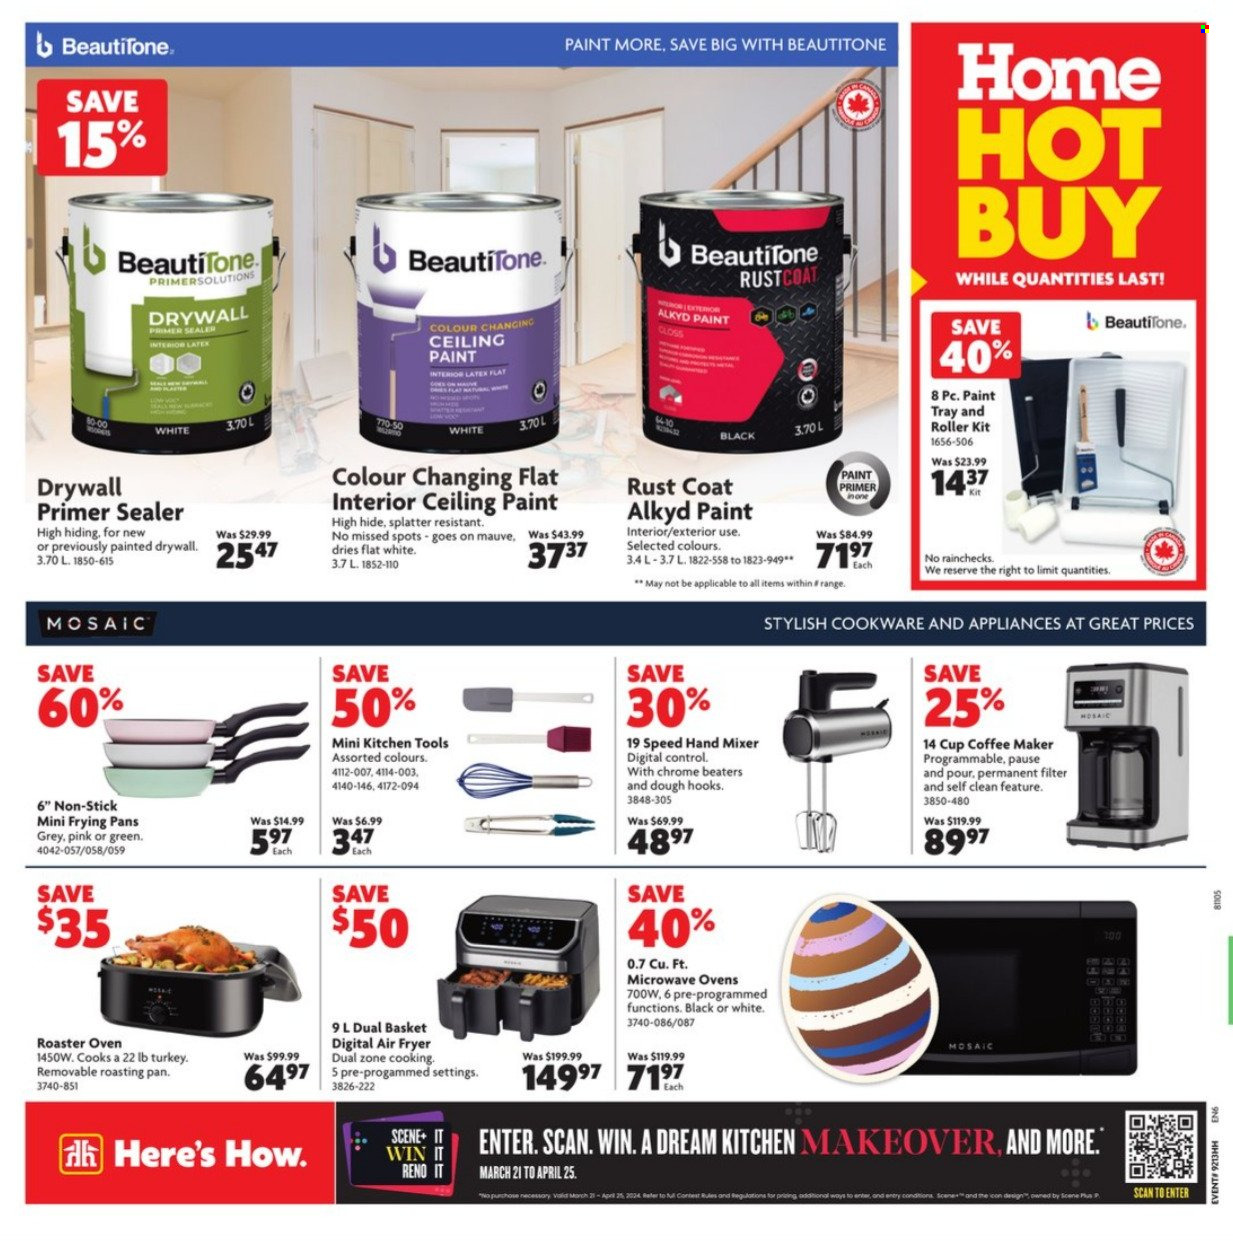 Home Hardware flyer  - March 28, 2024 - April 03, 2024.